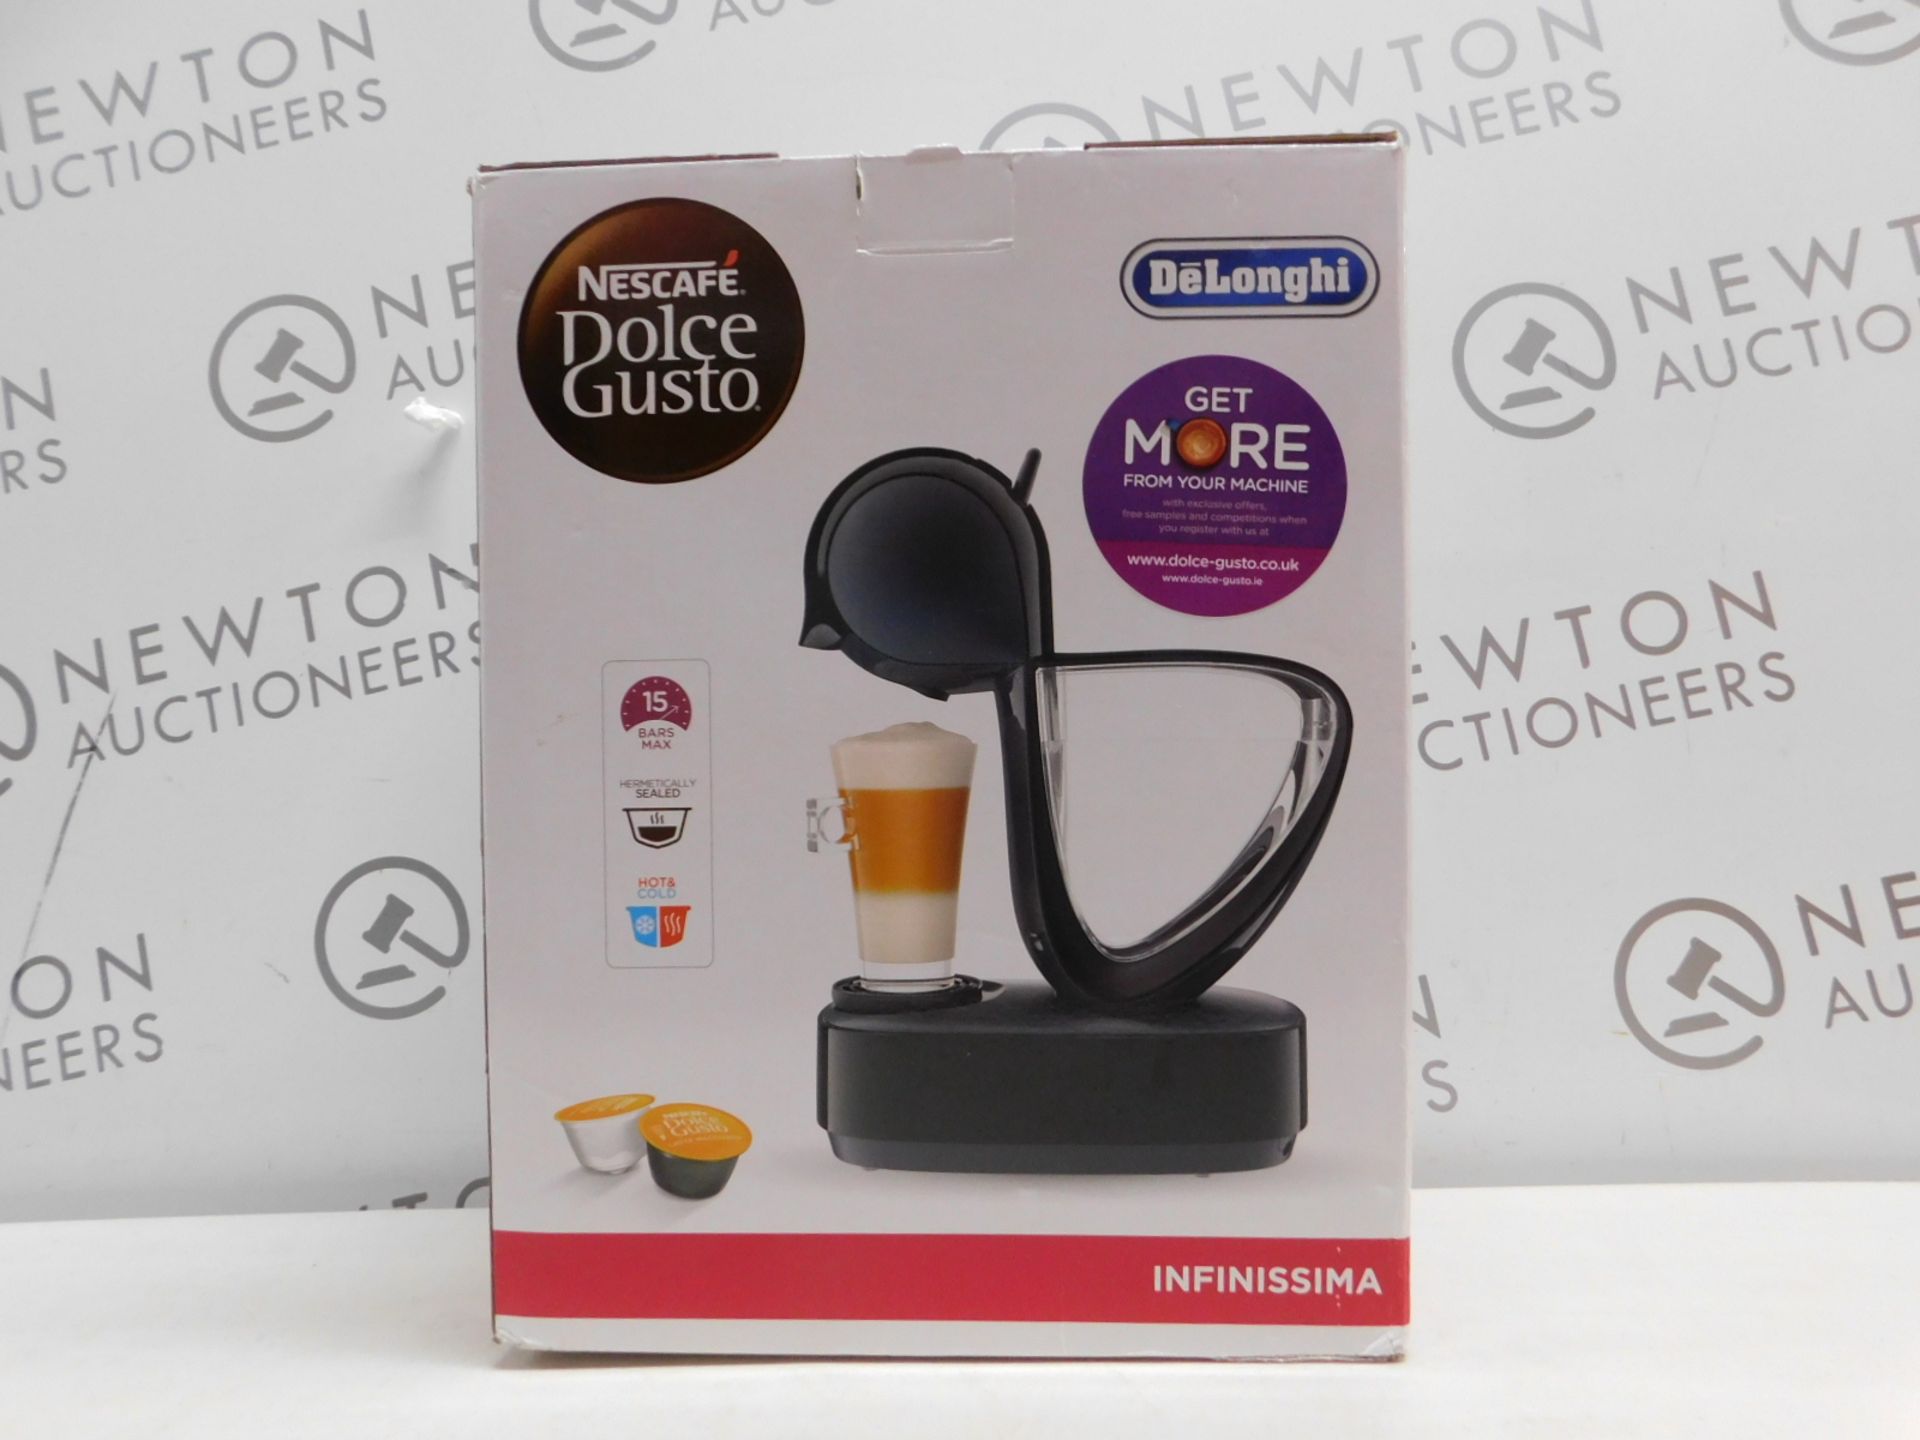 1 BOXED NESCAFE DOLCE GUSTO INFINISSIMA AUTOMATIC COFFEE POD MACHINE BY DELONGHI RRP Â£114.99